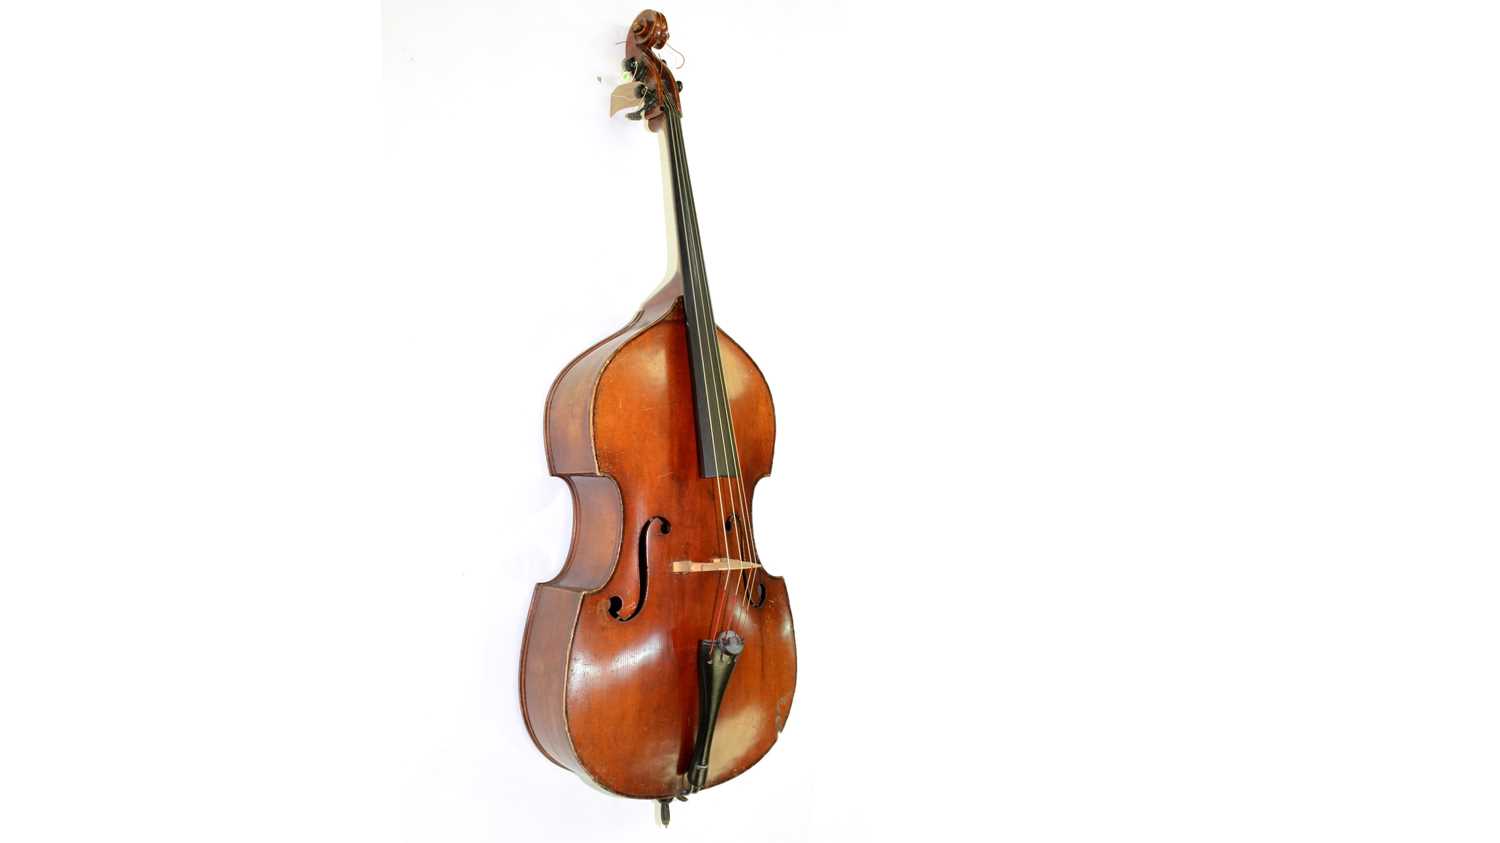 43 - An upright acoustic double bass